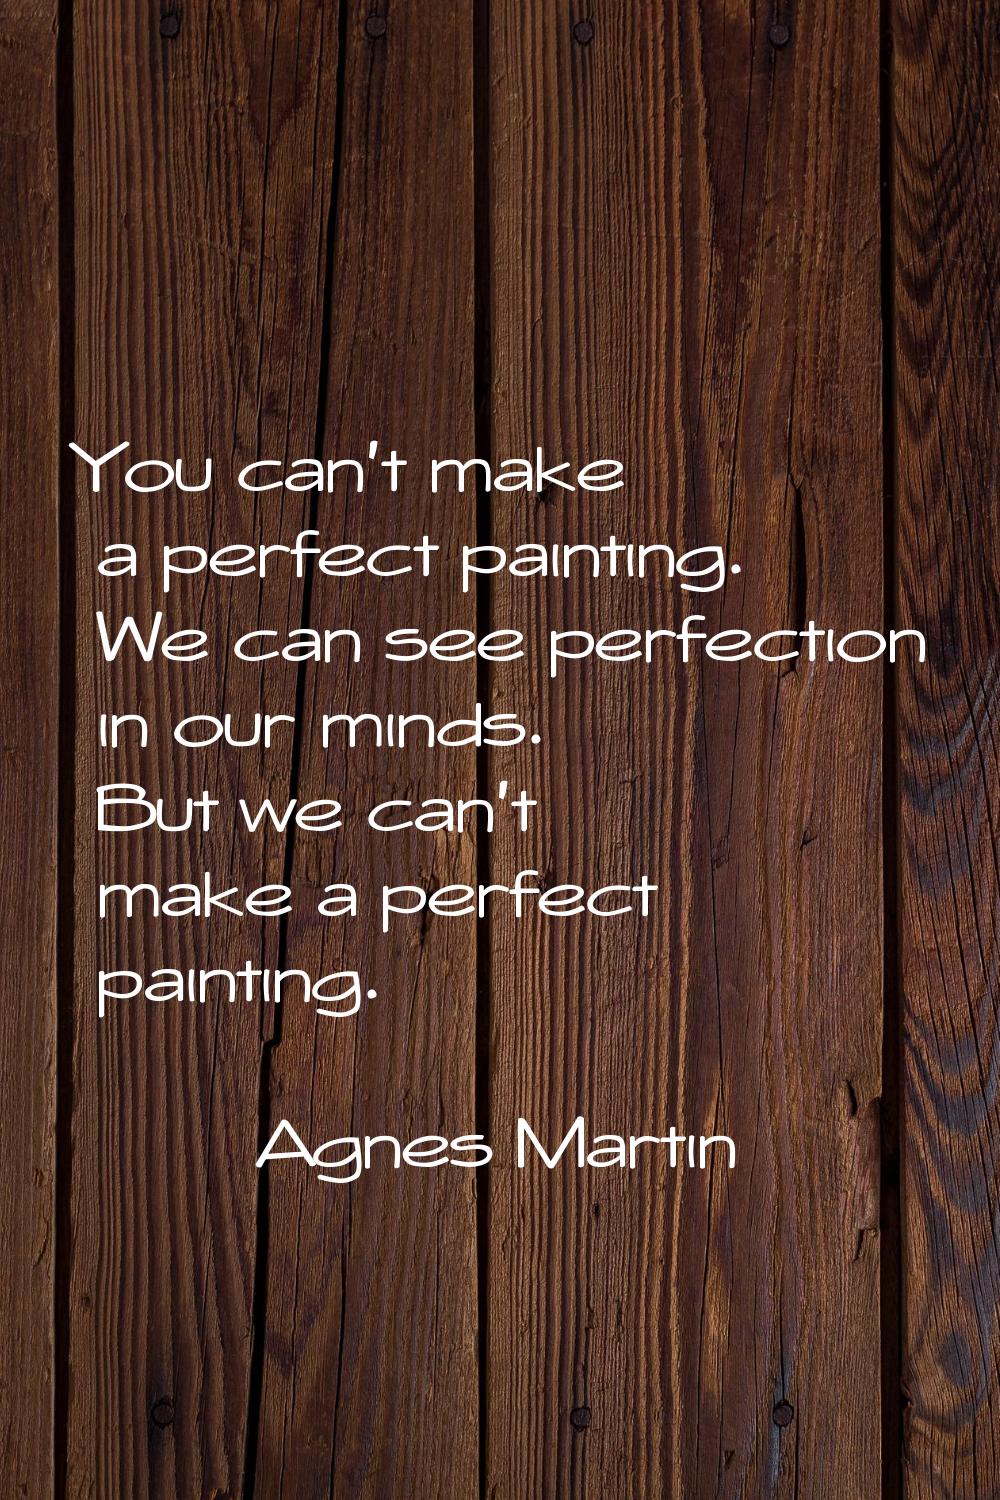 You can't make a perfect painting. We can see perfection in our minds. But we can't make a perfect 